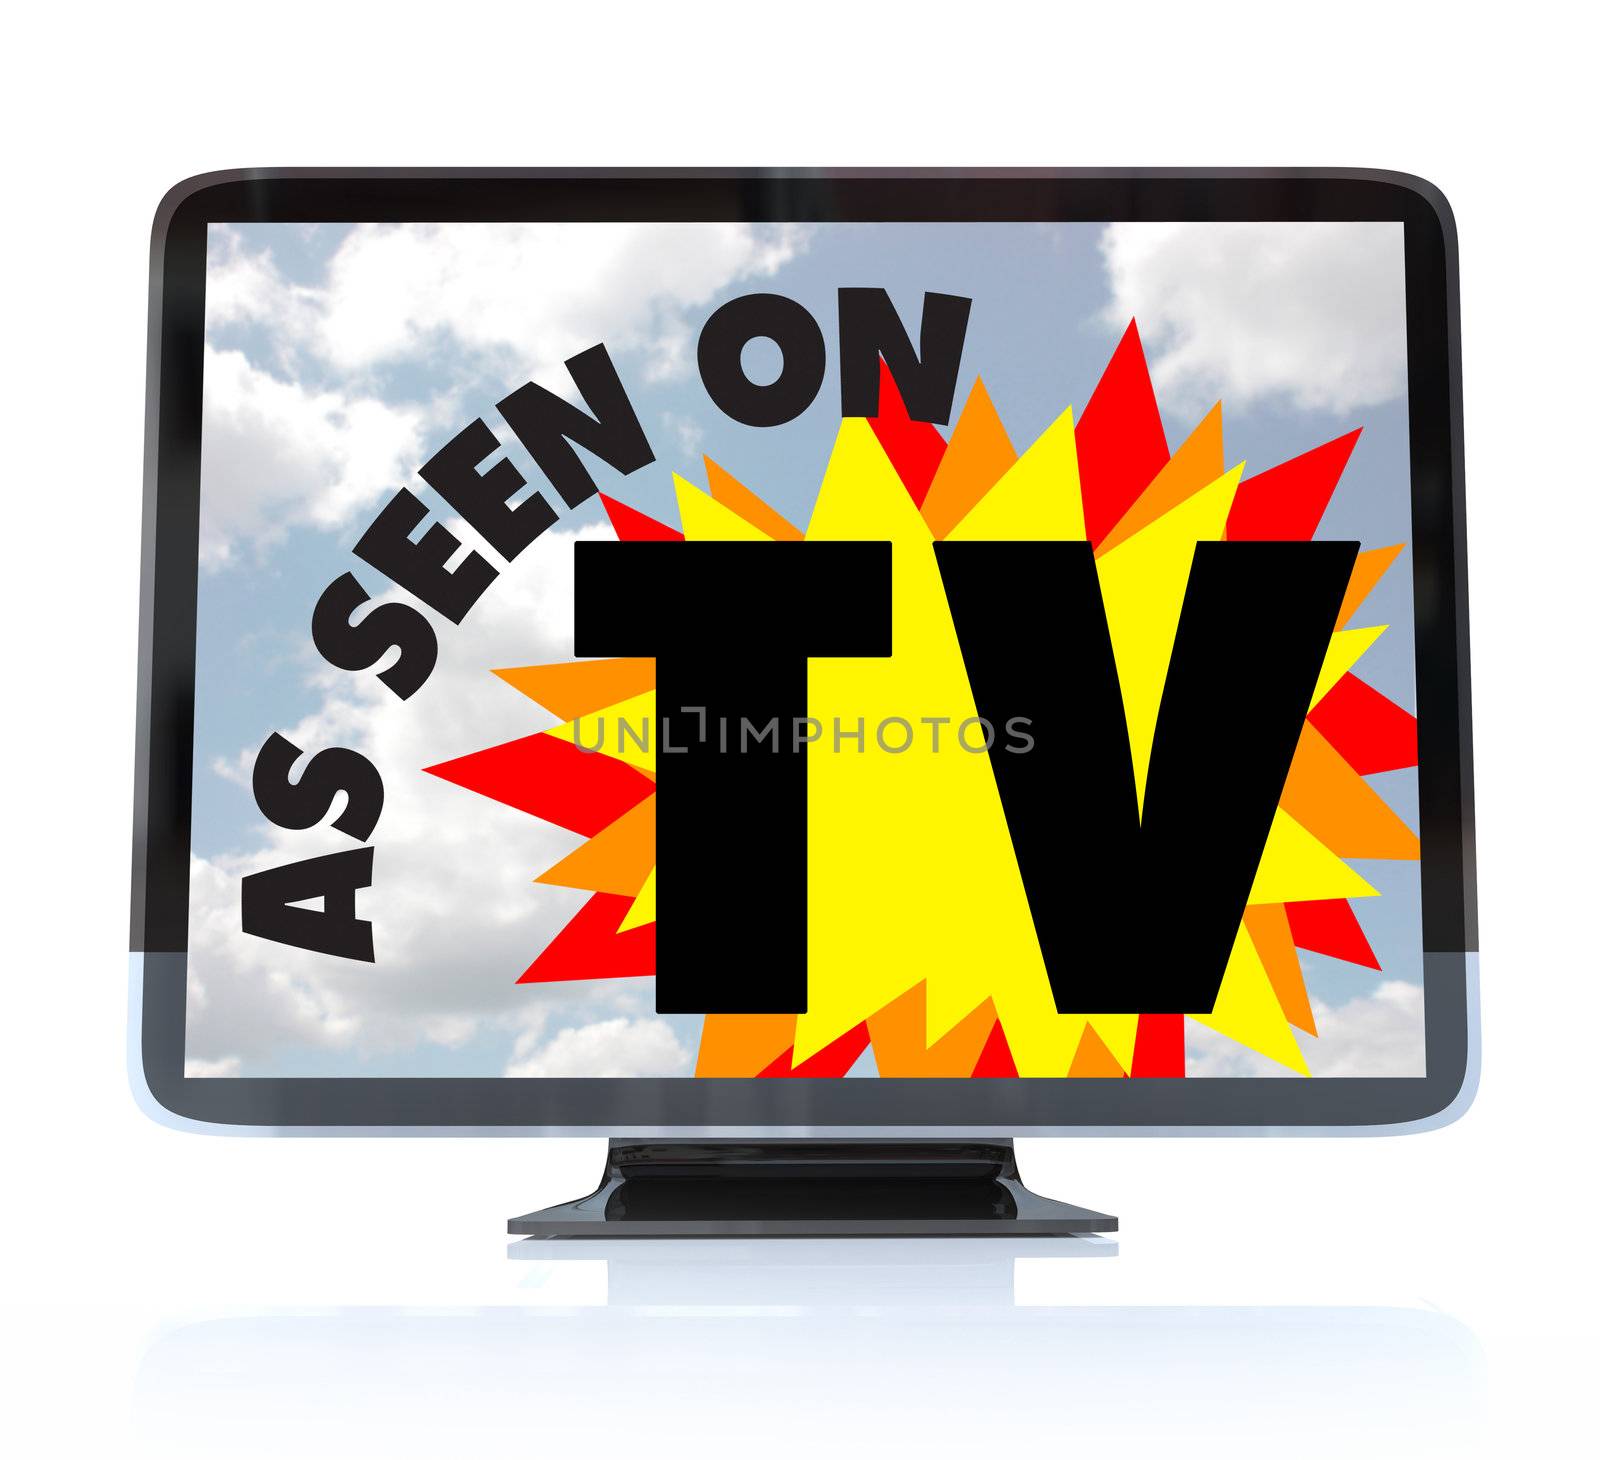 A HDTV television with the words As Seen on TV on the screen